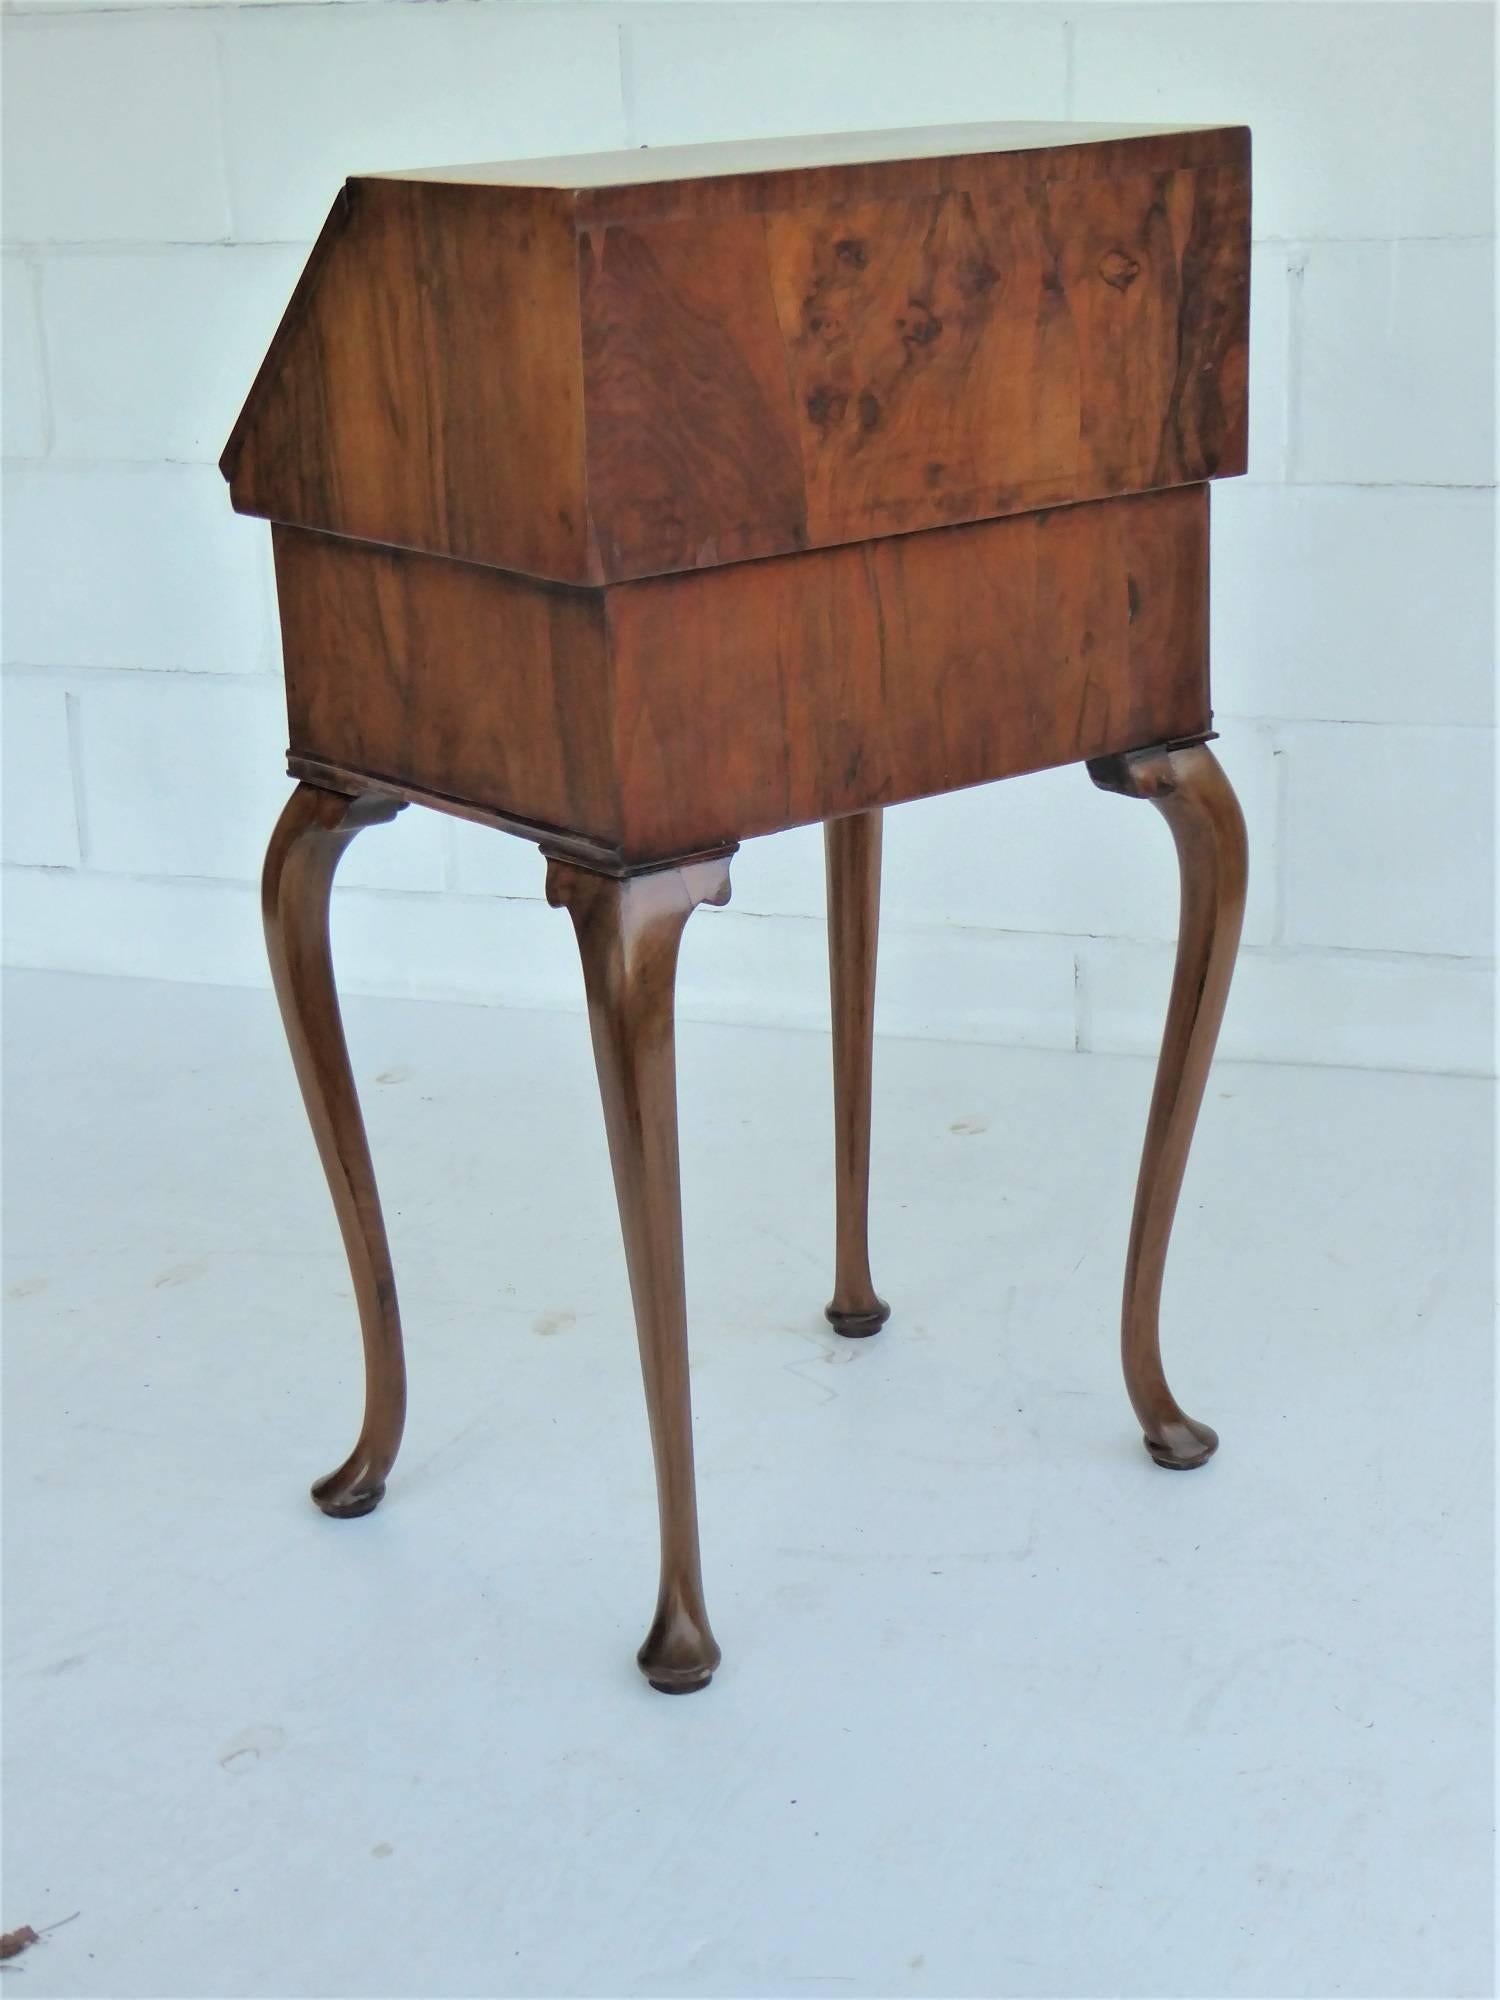 Early 20th Century Antique Walnut Secretary of Small Proportions